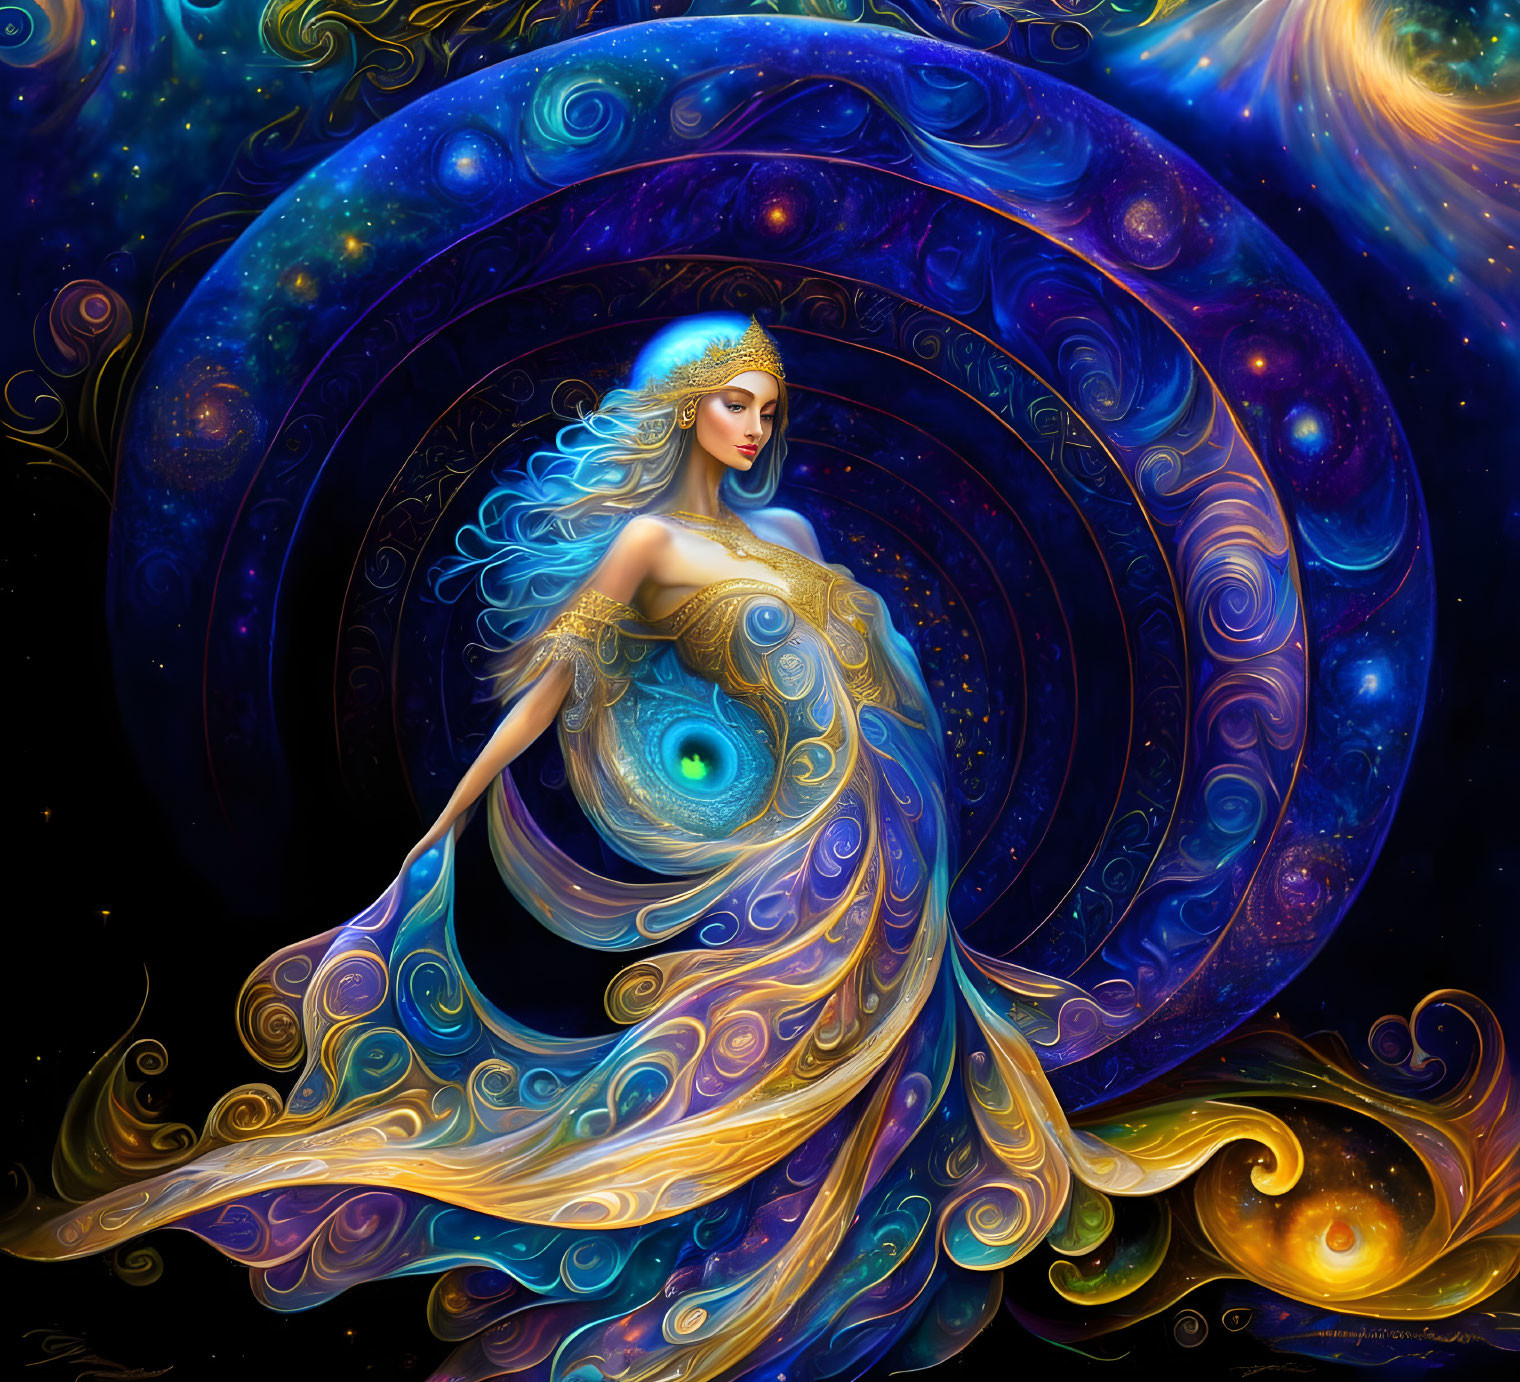 Mystical woman with blue hair in galaxy-themed dress on cosmic background